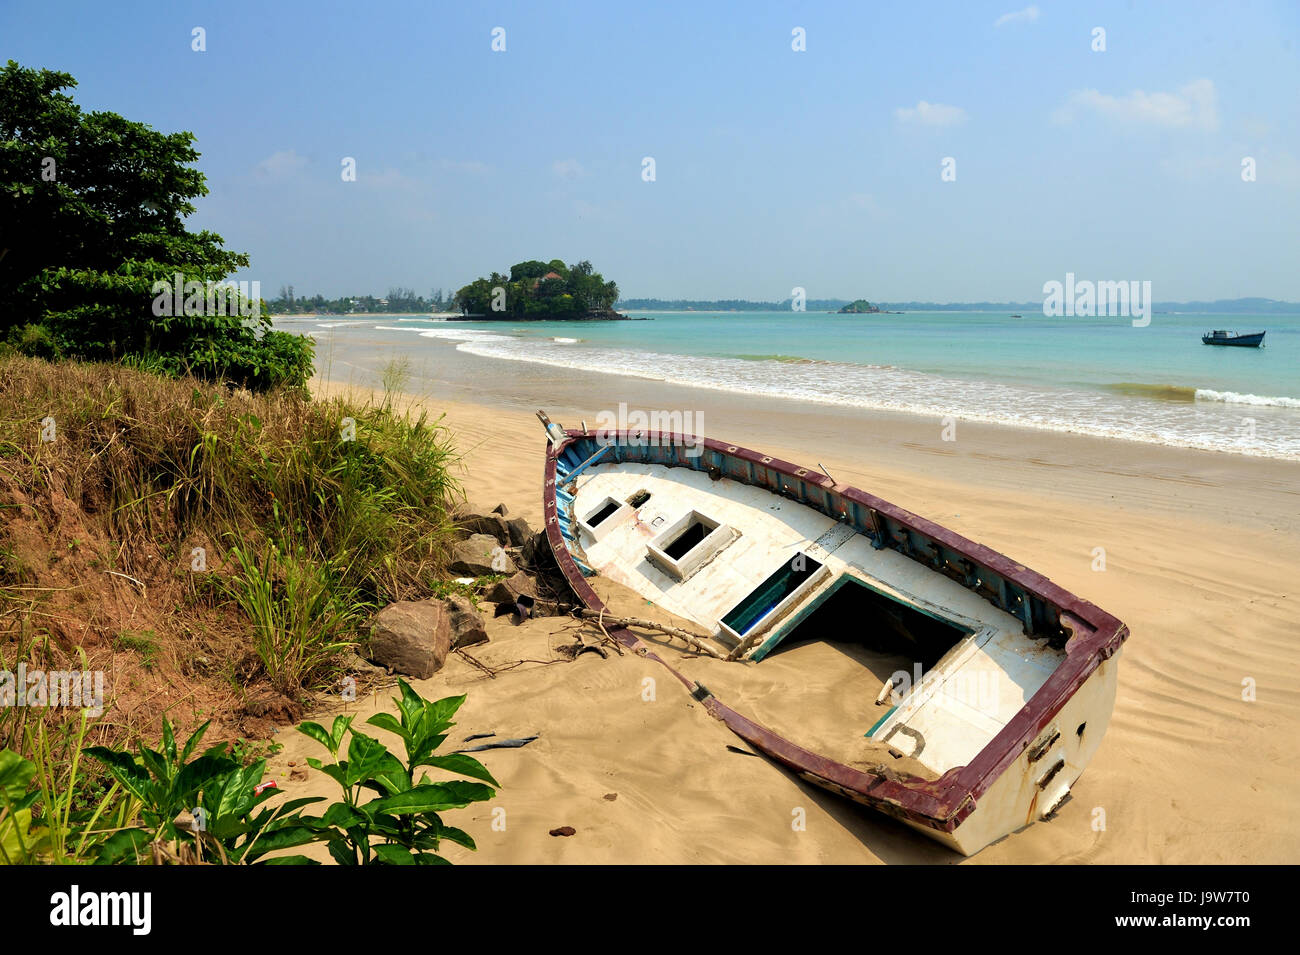 Old yacht stranded on a beach after storms in ocean Stock Photo